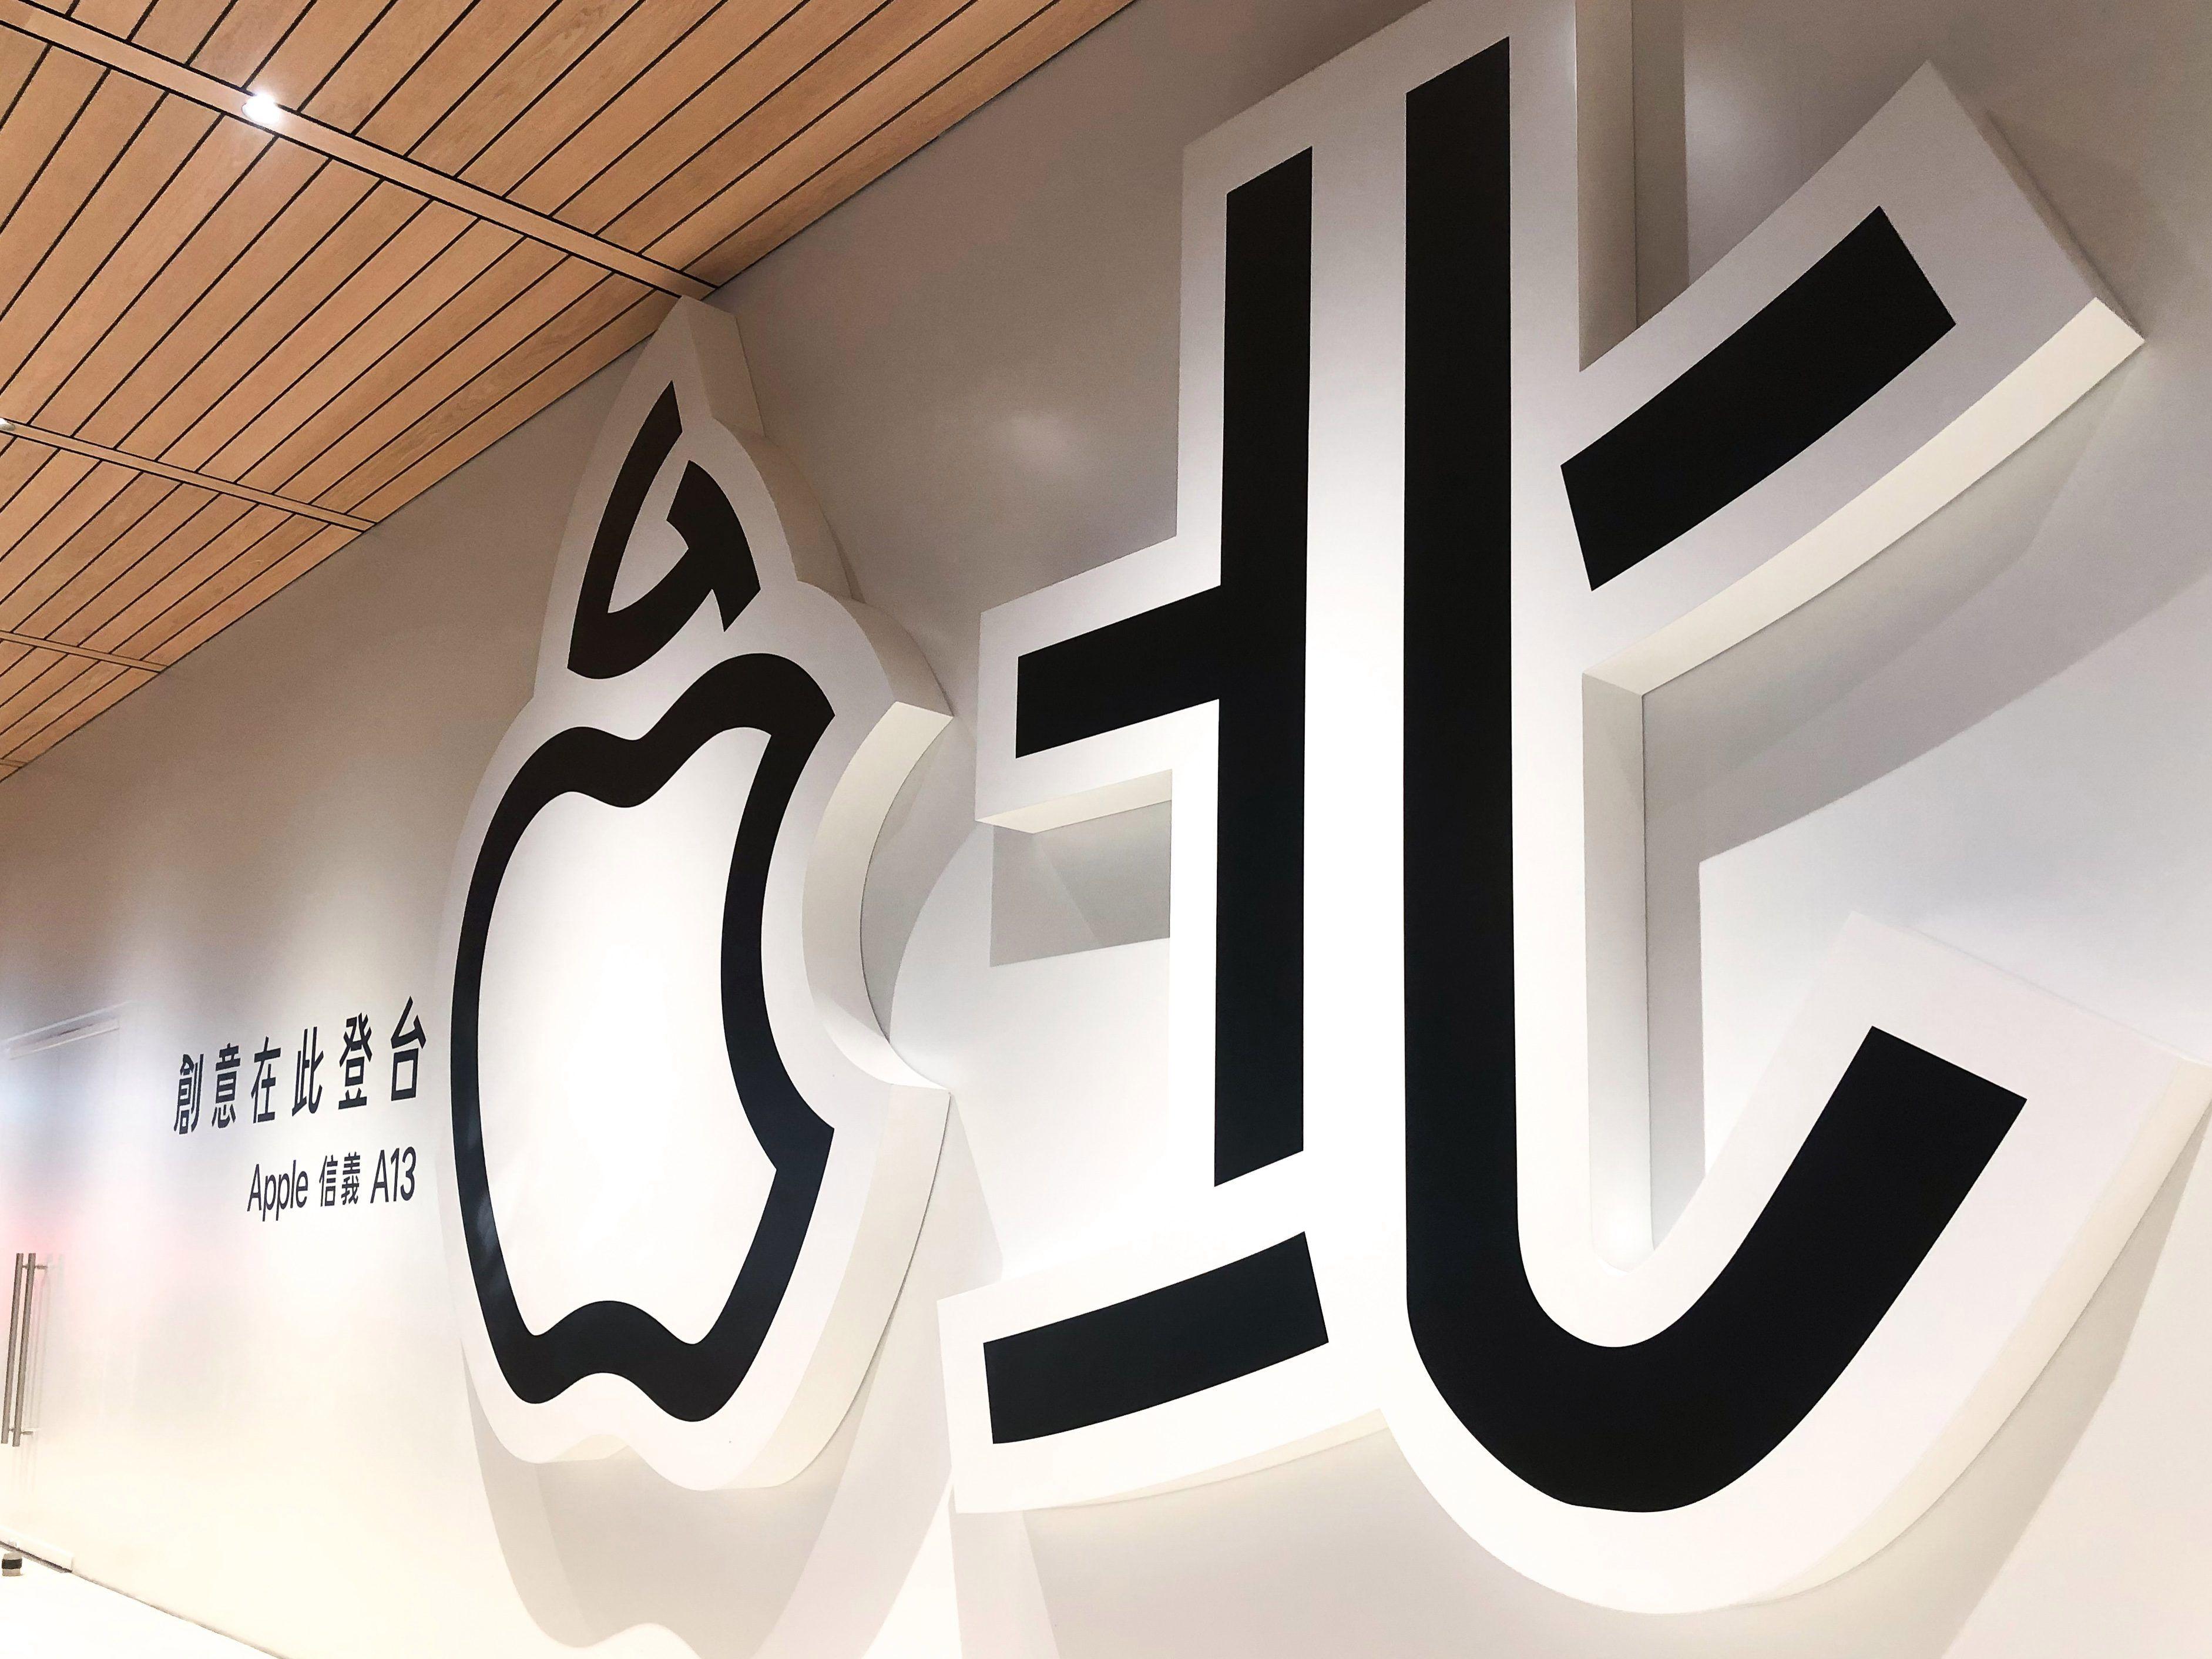 MacStore Logo - Grand opening of Taiwan's second Apple Store set for June 15th